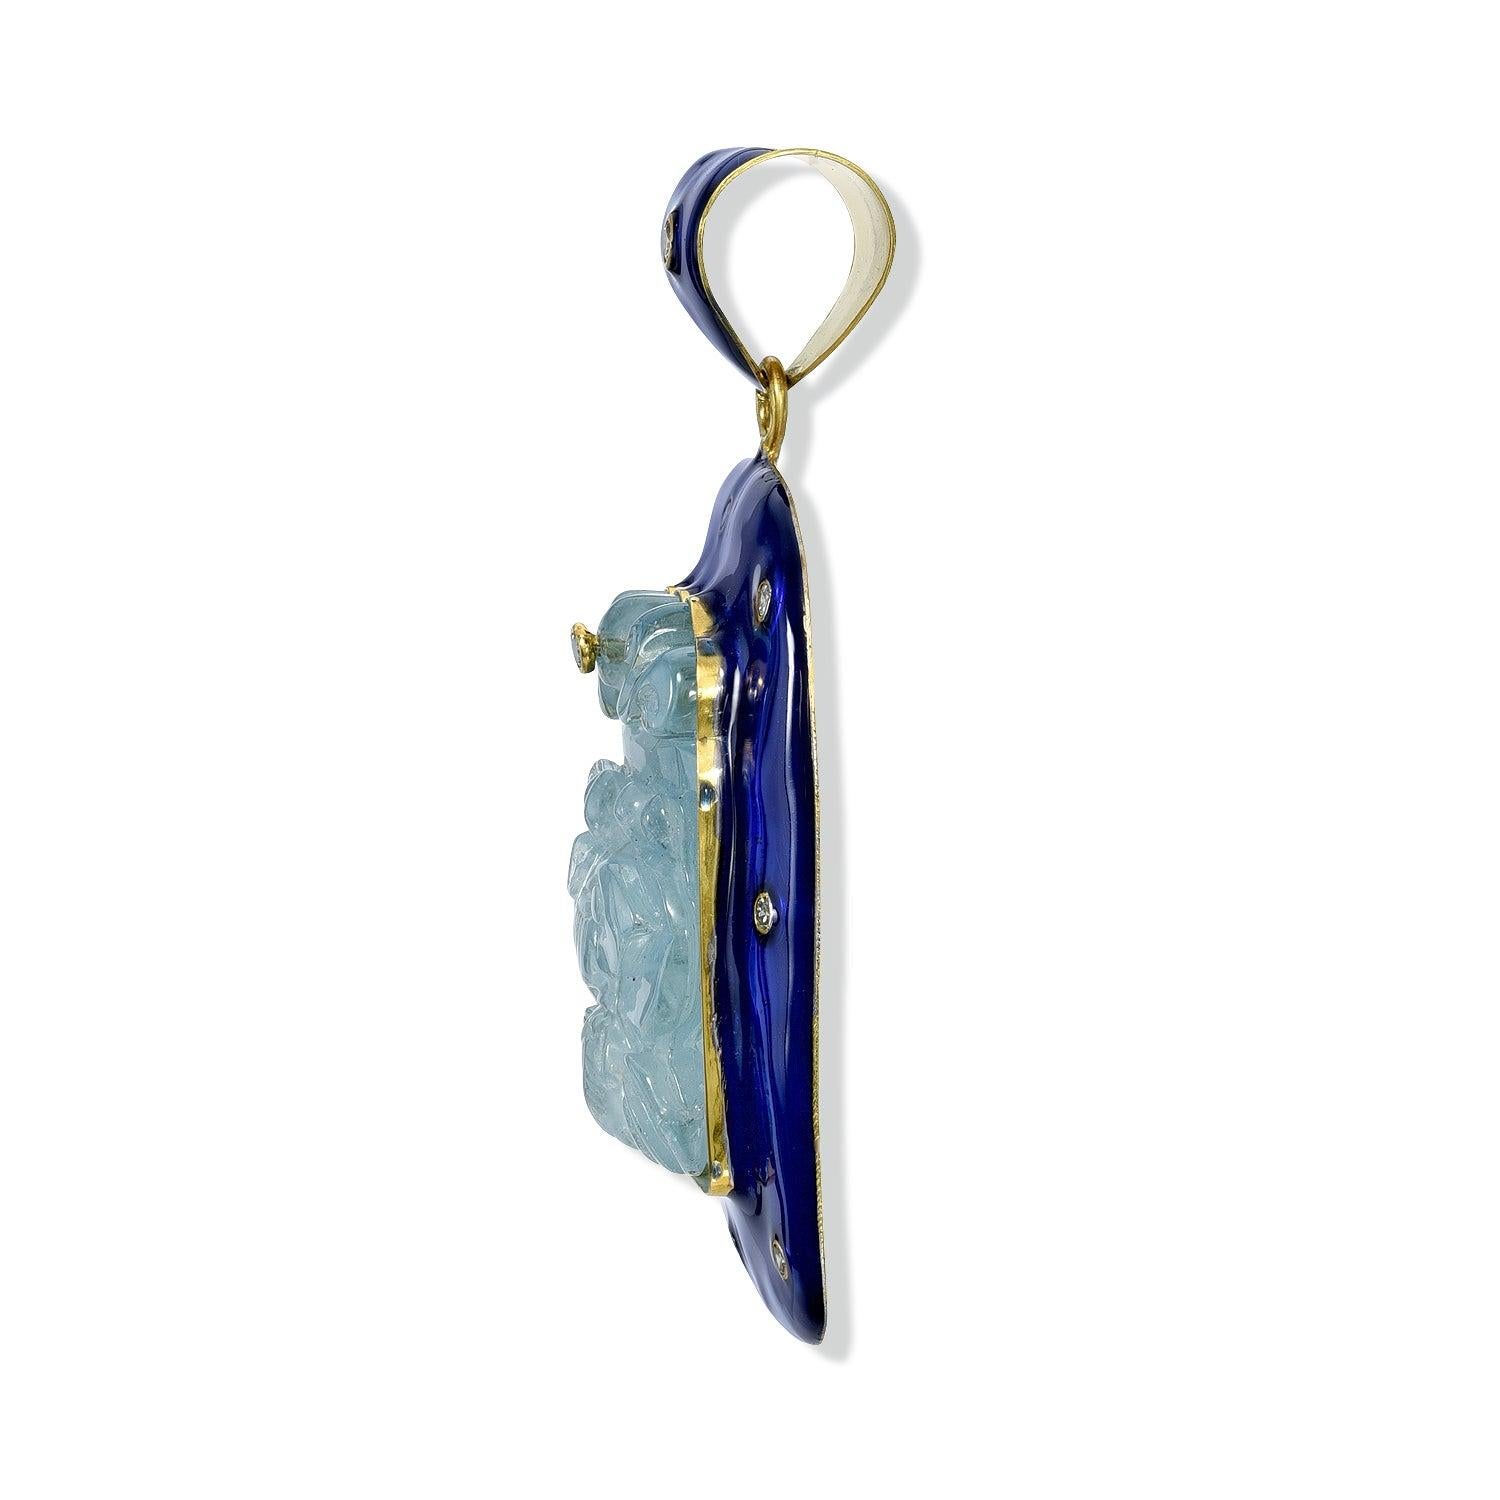 Add a touch of elegance to your collection with our Aquamarine Carving Enamel Pendant. Its hand-painted enamel detailing brings a new level of luxury and craftsmanship to the piece, and the 18k gold brings an edgy flair that makes this pendant an